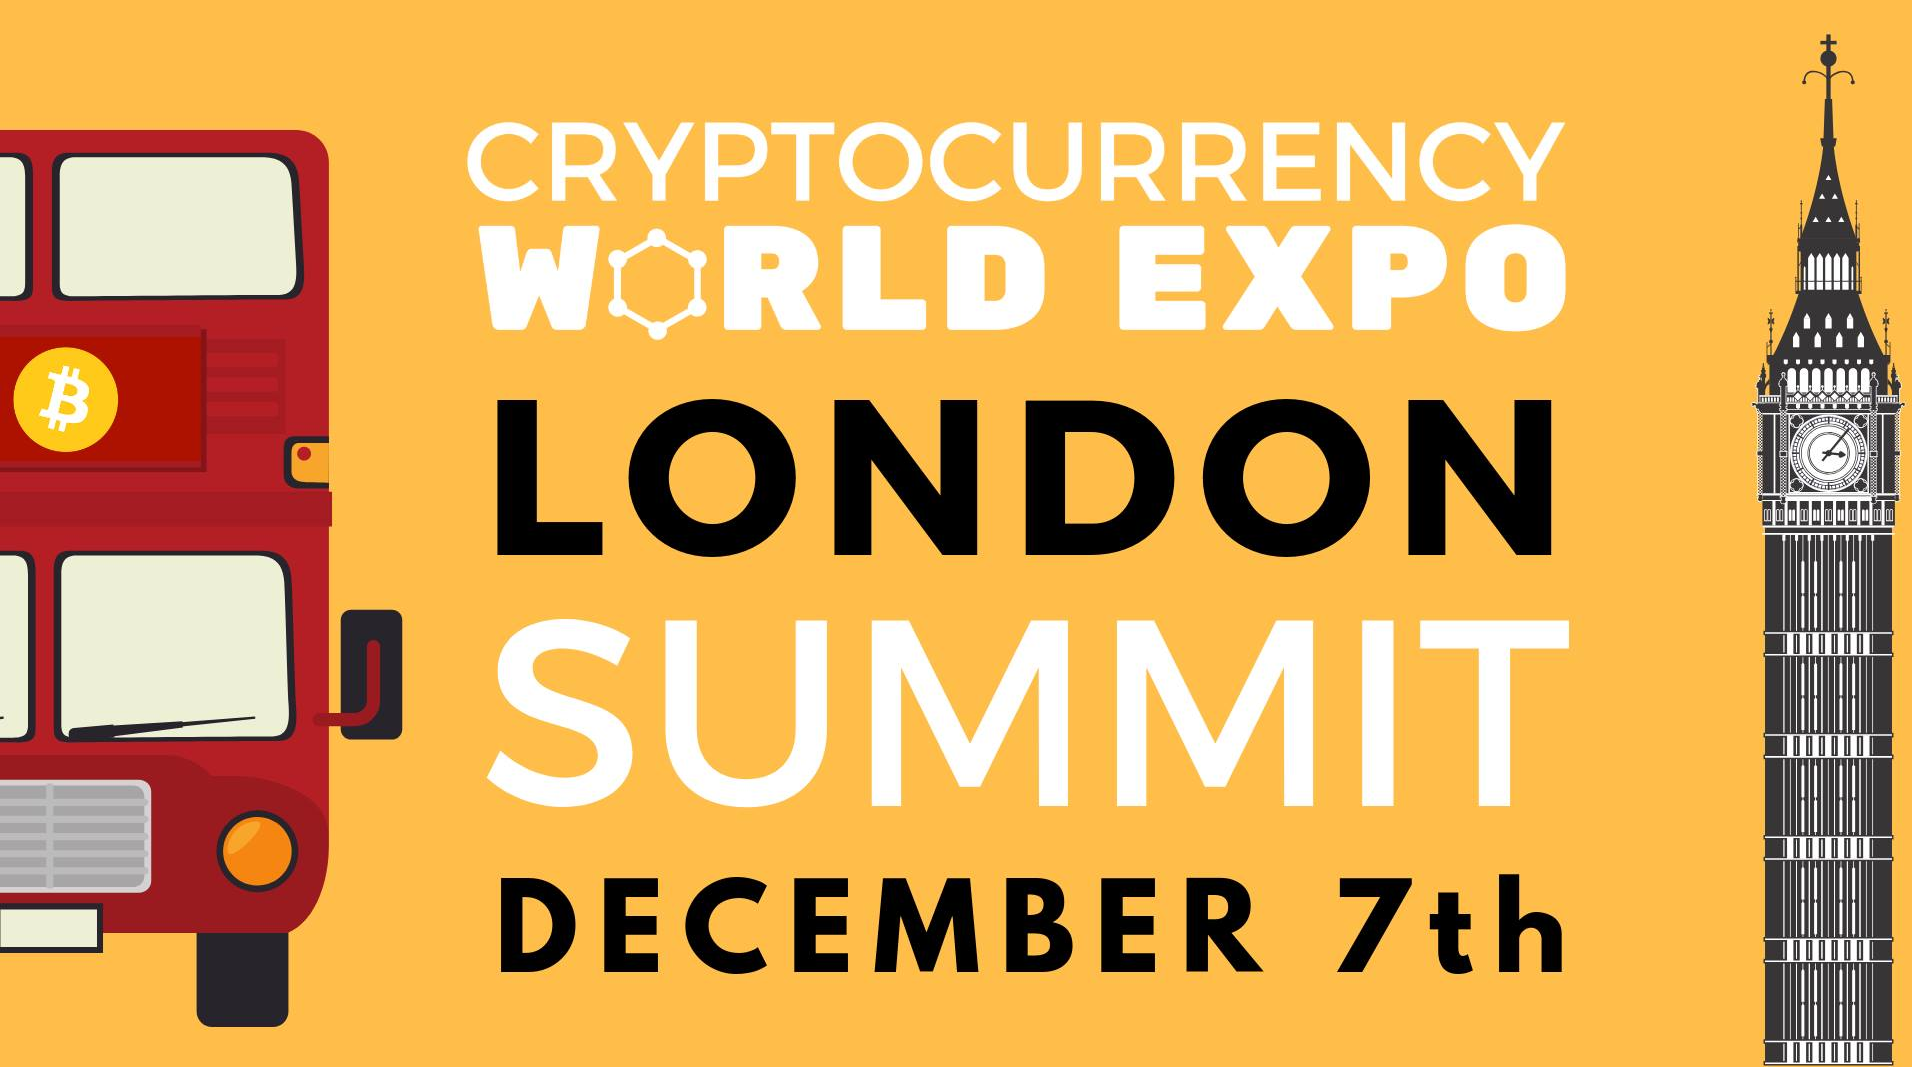 The 4th Edition of the Biggest Crypto and Blockchain Expo is finally here!